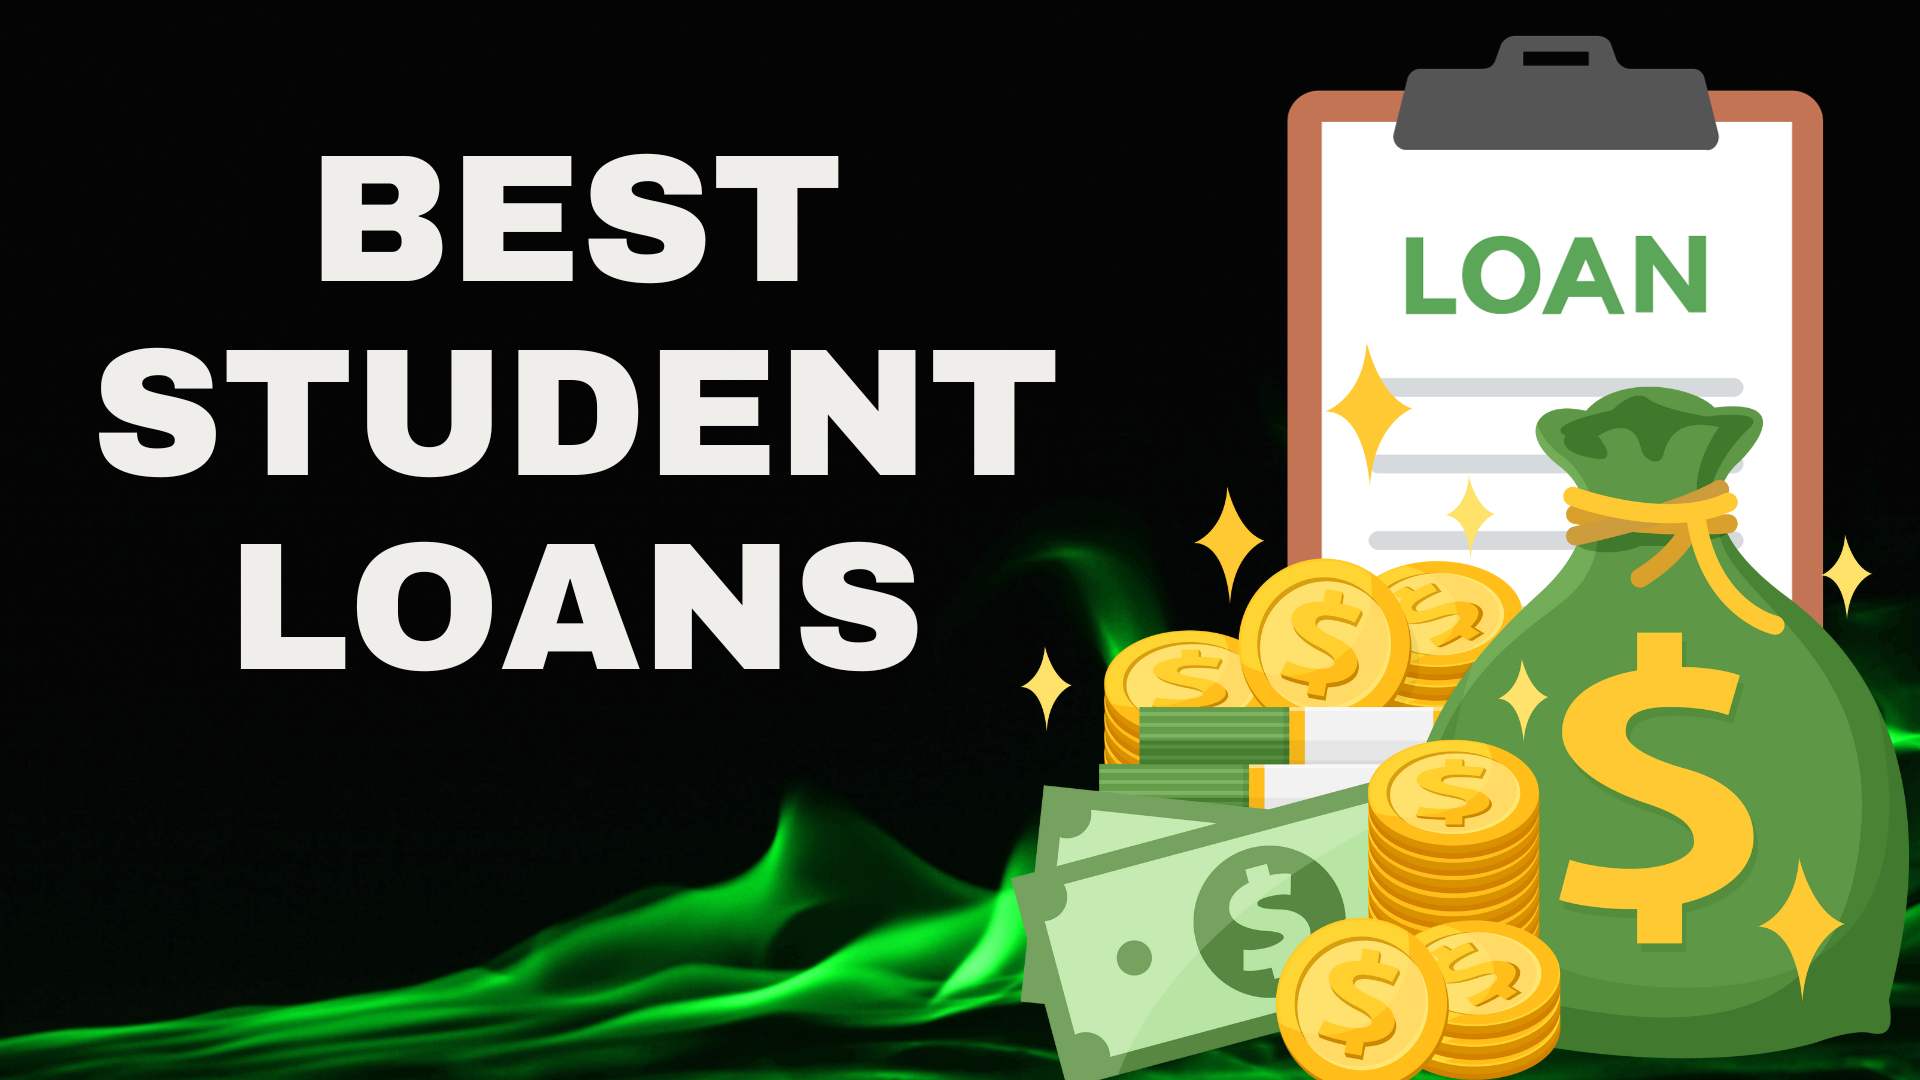 Personal Loans and Best Student Loans with Lowest Interest Rates.